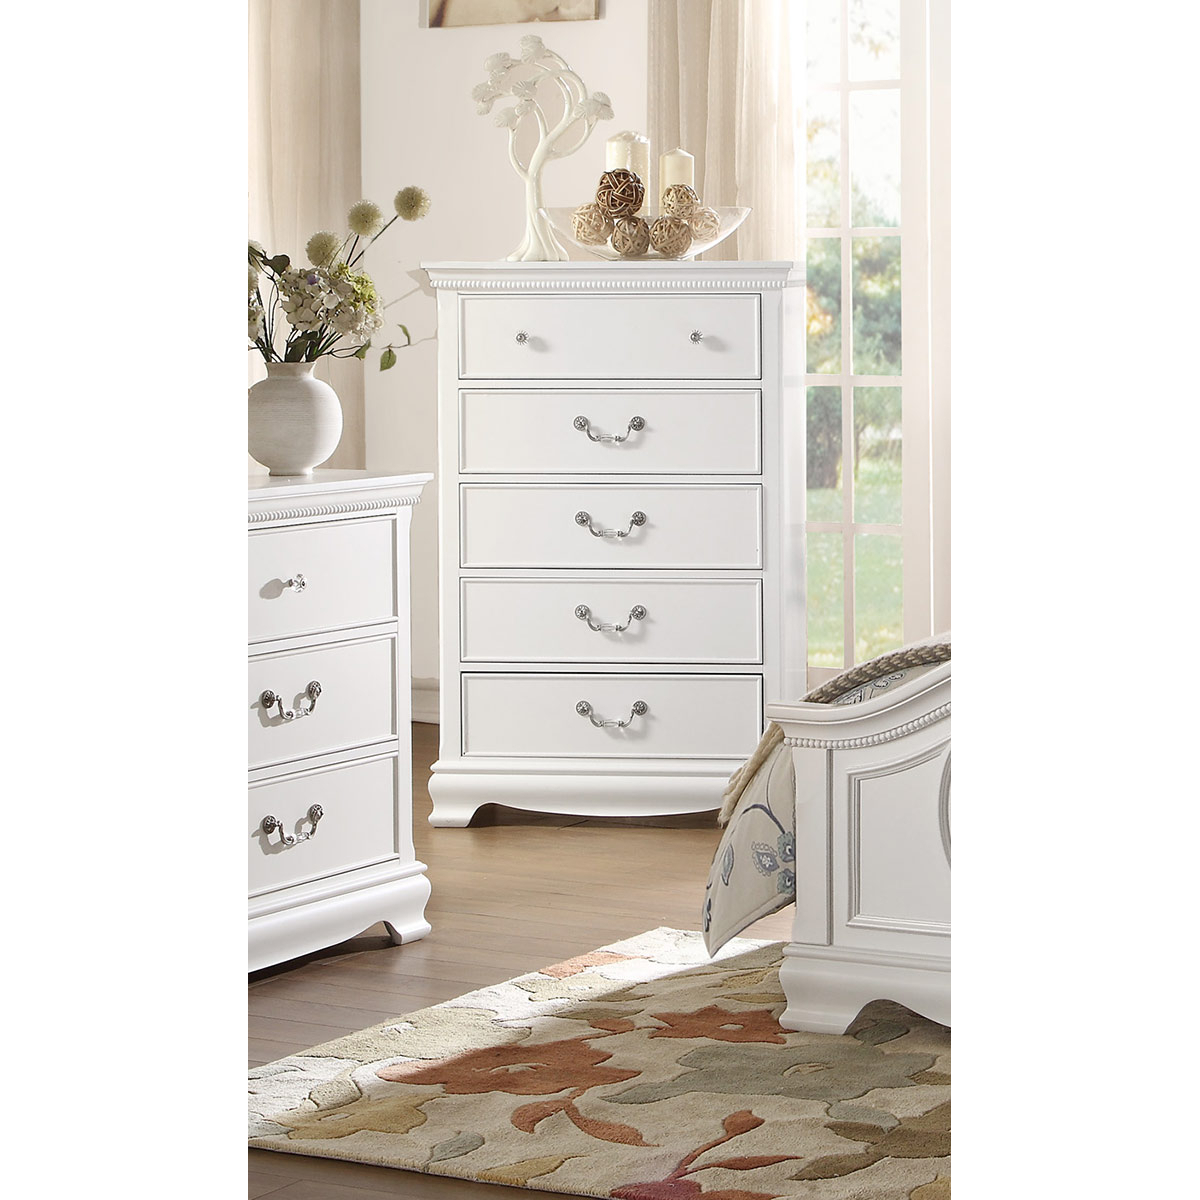 Traditional Style Wooden Chest With 5 Drawers, White